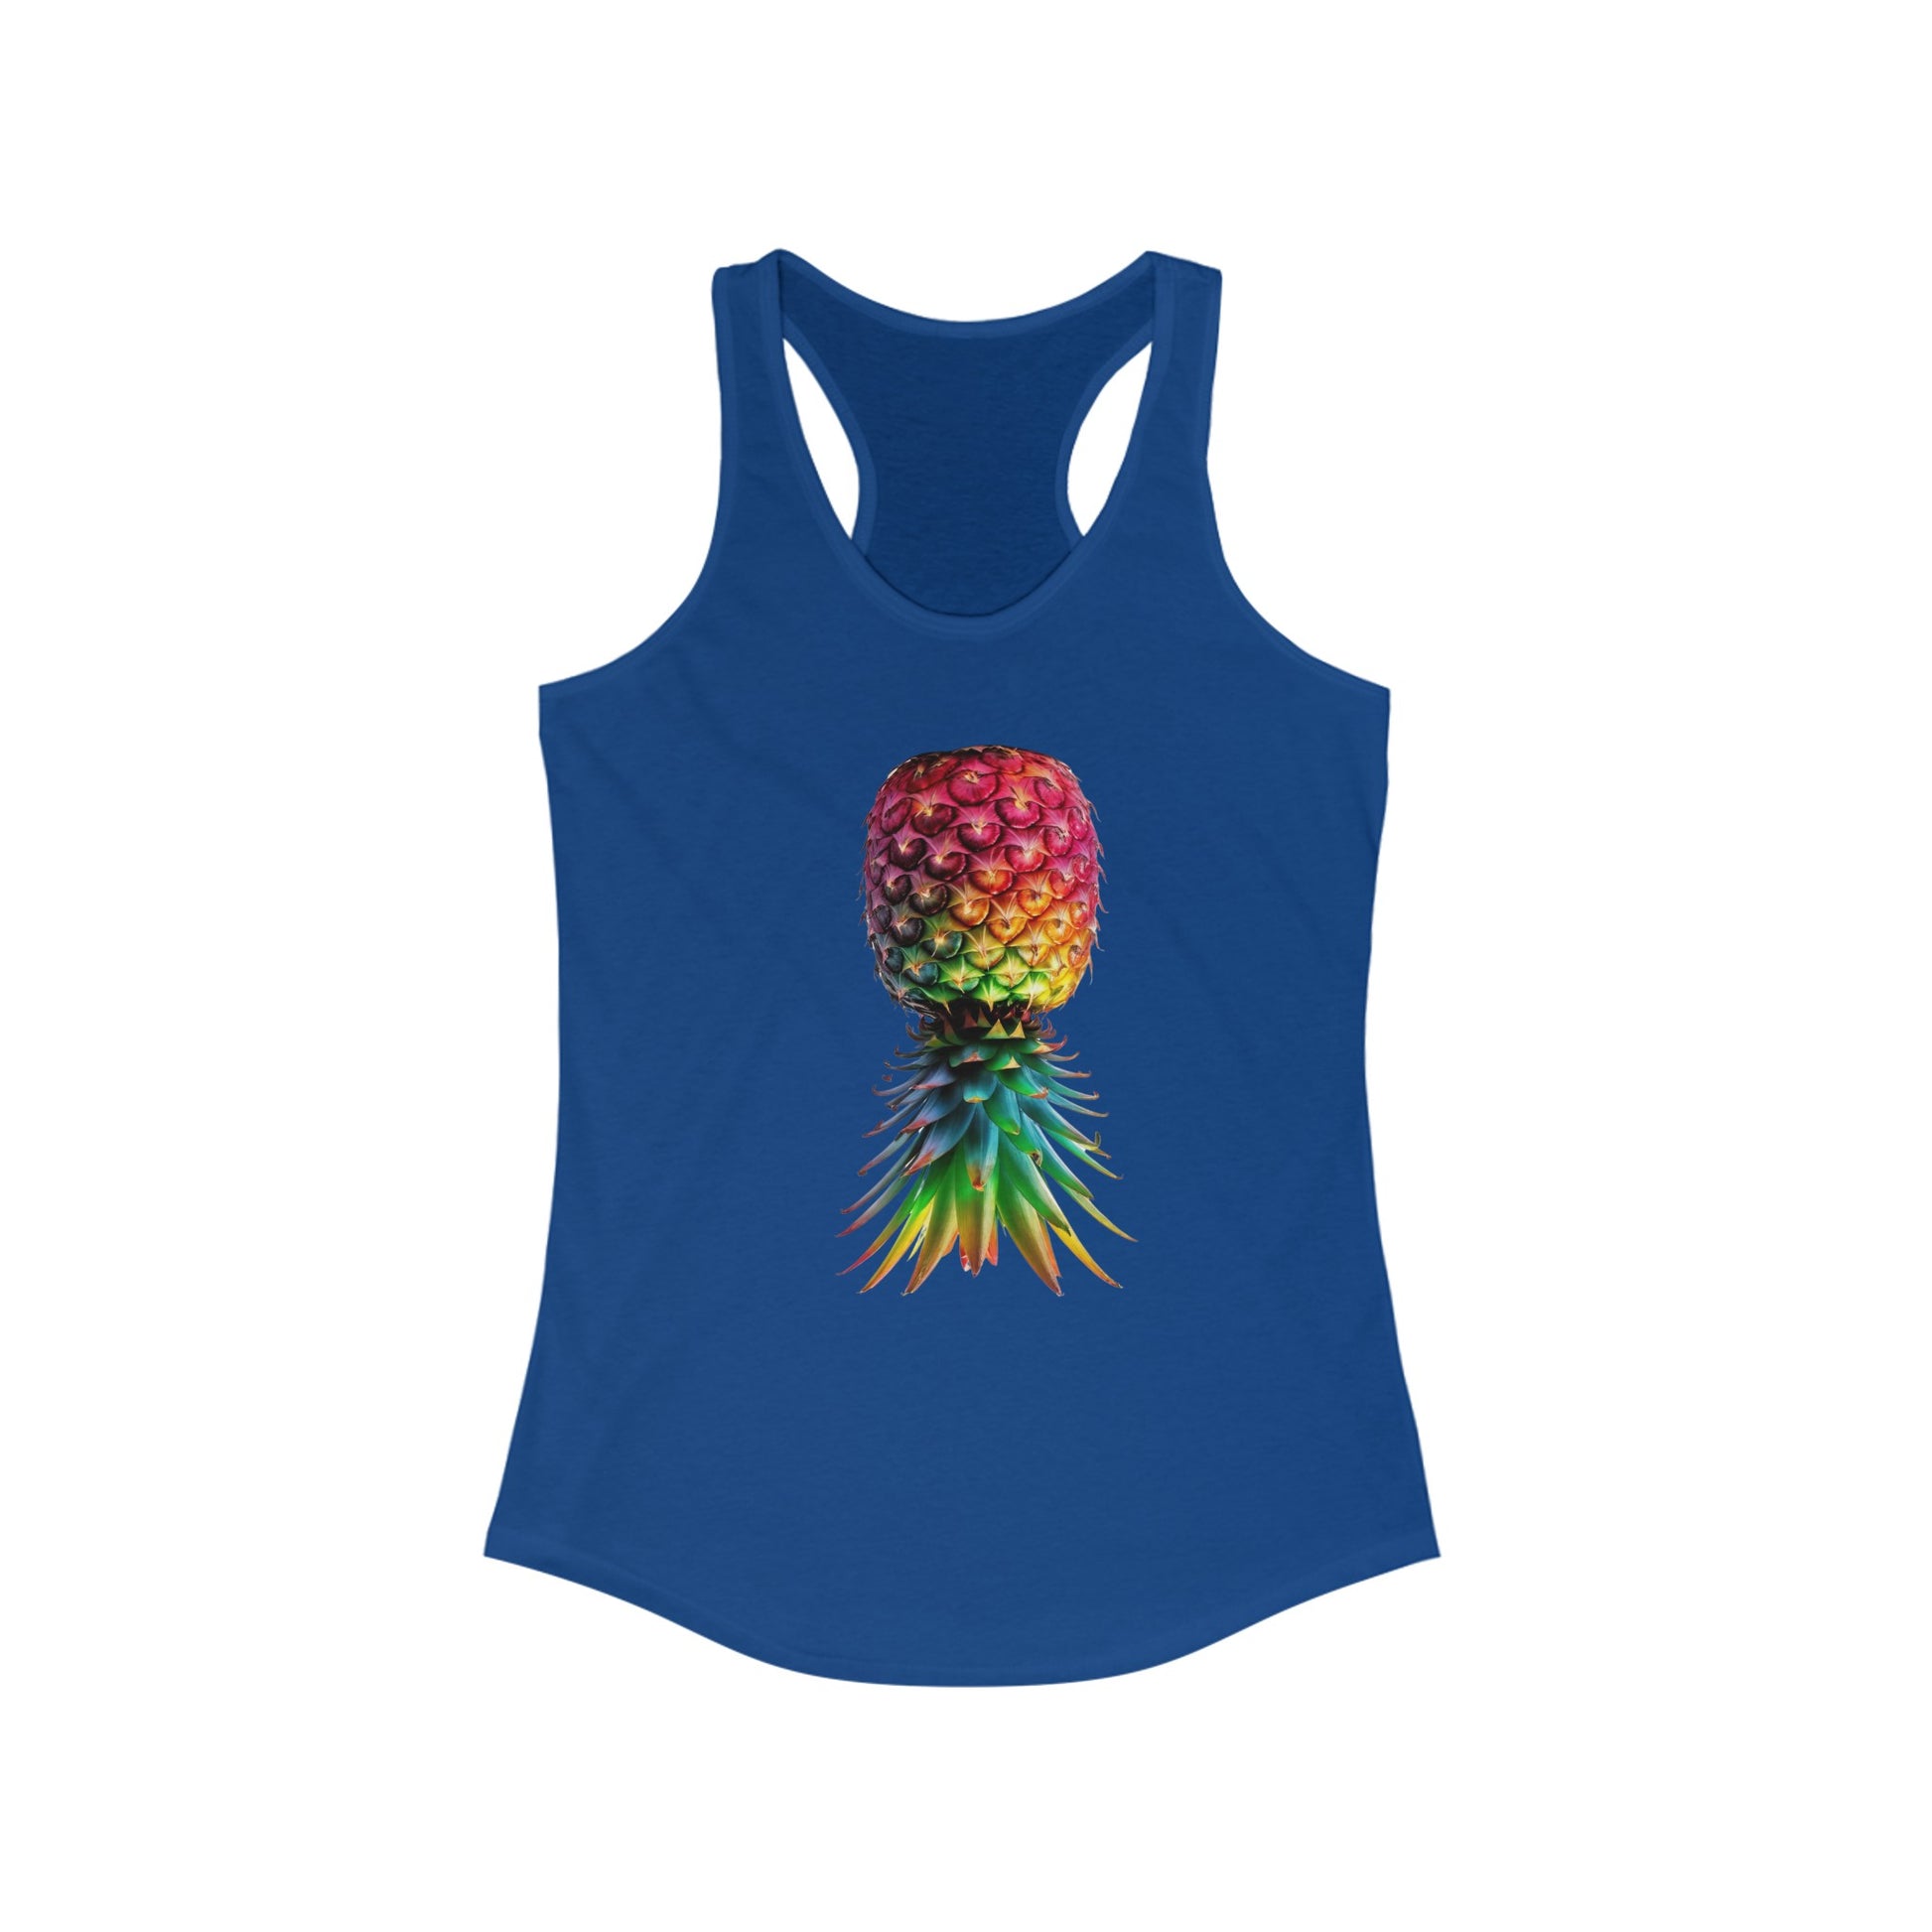 The Stamina for Men Women's Upside-down Pineapple royal blue Top | QOS front view